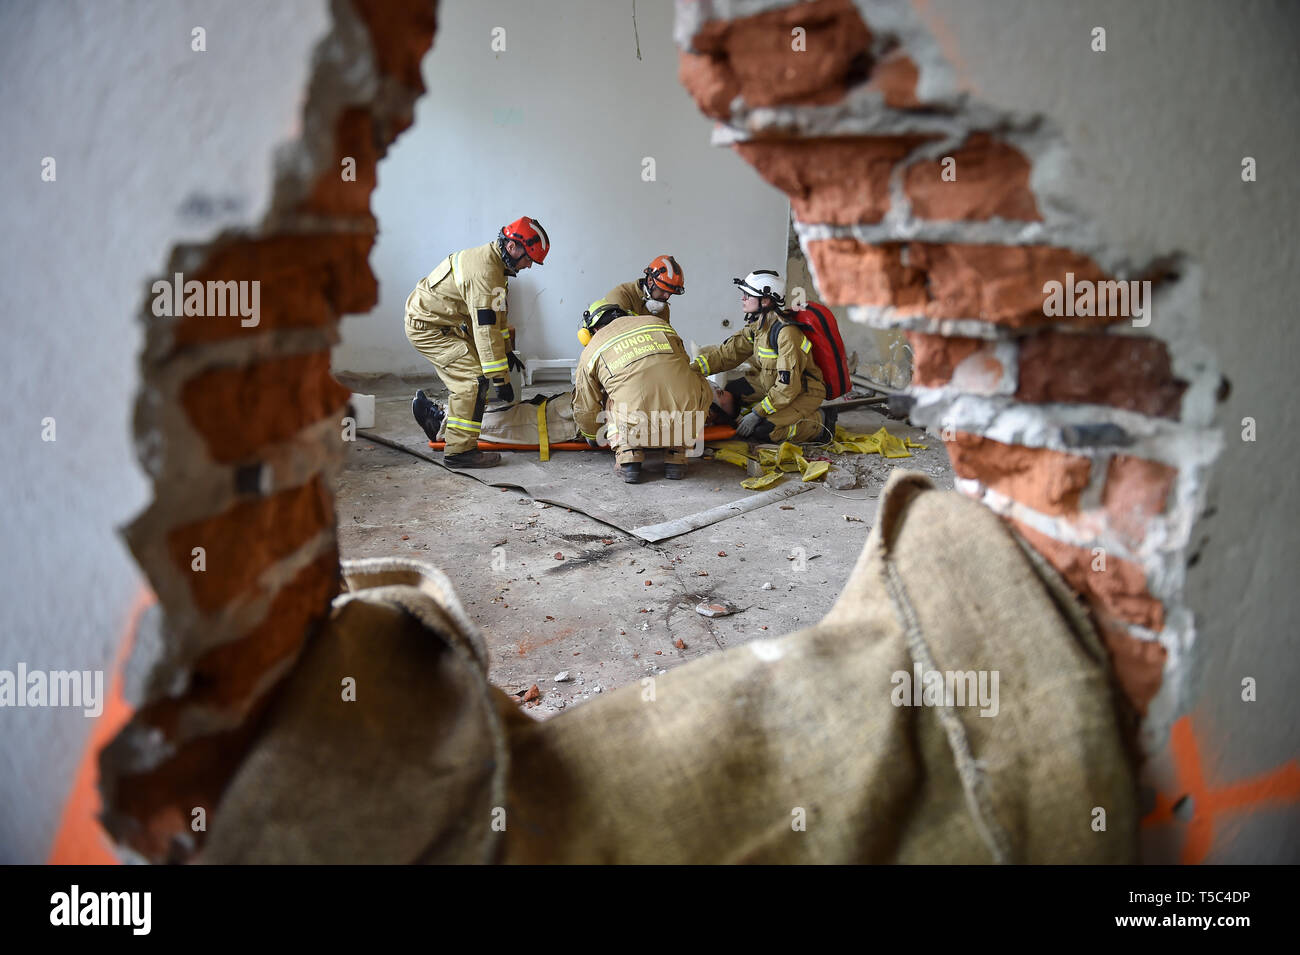 BUCHAREST, ROMANIA - APRIL 10, 2019: Emergency rescue team in action during the most complex medical exercise in the history of NATO, Vigorous Warrior Stock Photo